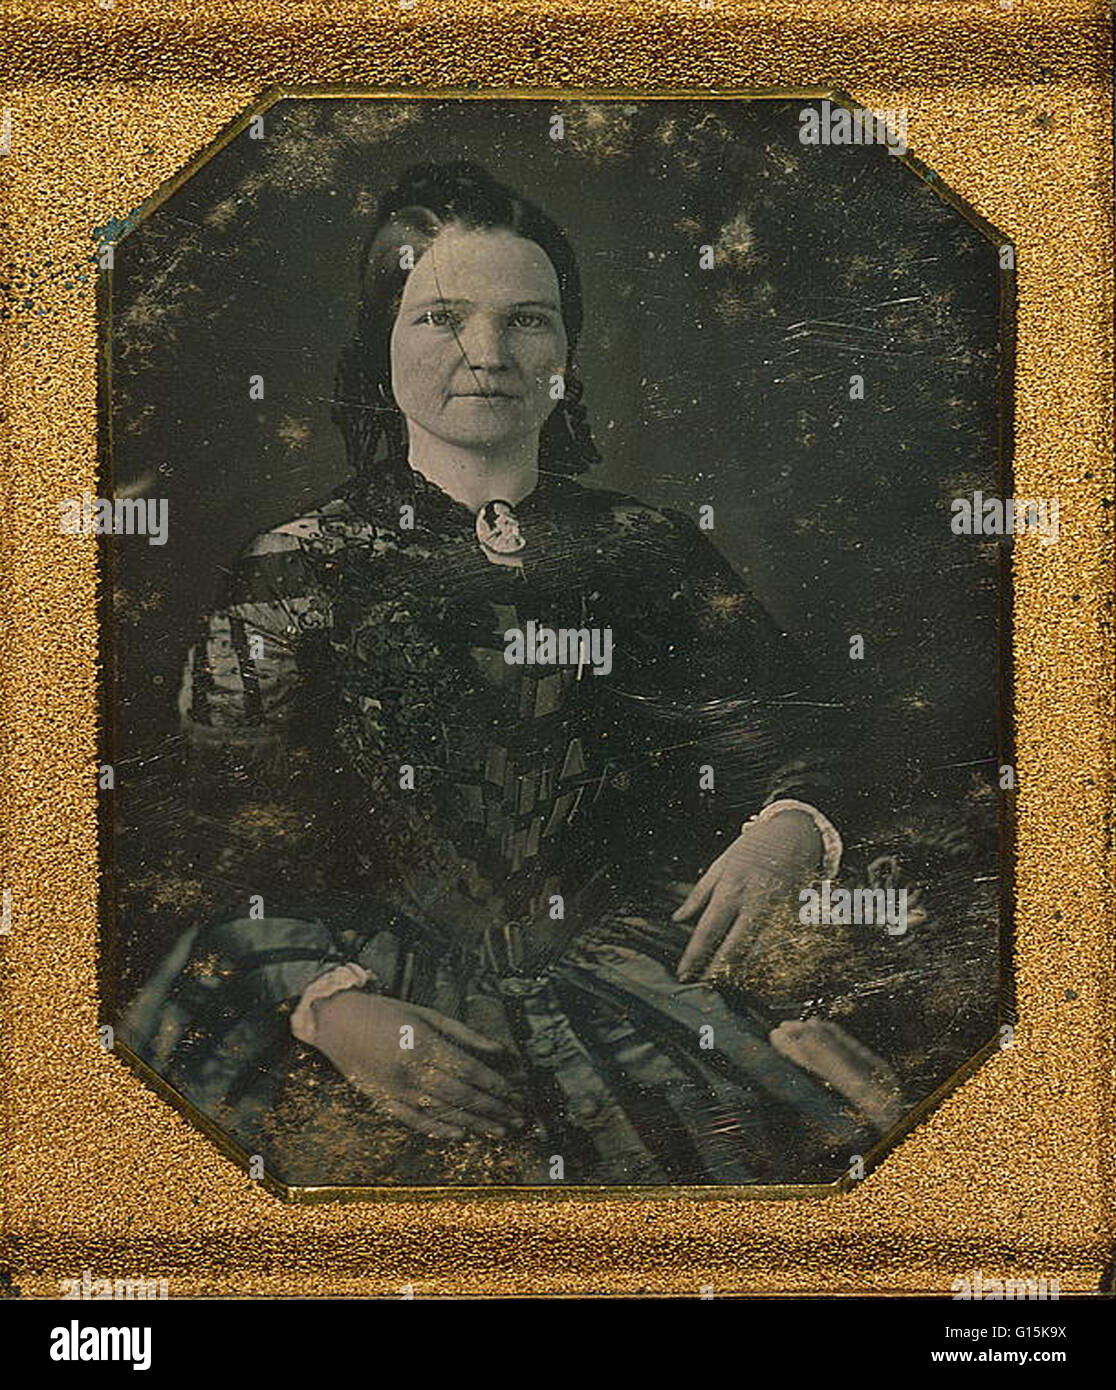 Daguerreotype entitled: Mary Todd Lincoln, wife of Abraham Lincoln. Mary Ann Todd Lincoln ( December 13, 1818 - July 16, 1882) was the wife of the 16th President of the United States, Abraham Lincoln, and was First Lady of the United States from 1861 to 1 Stock Photo